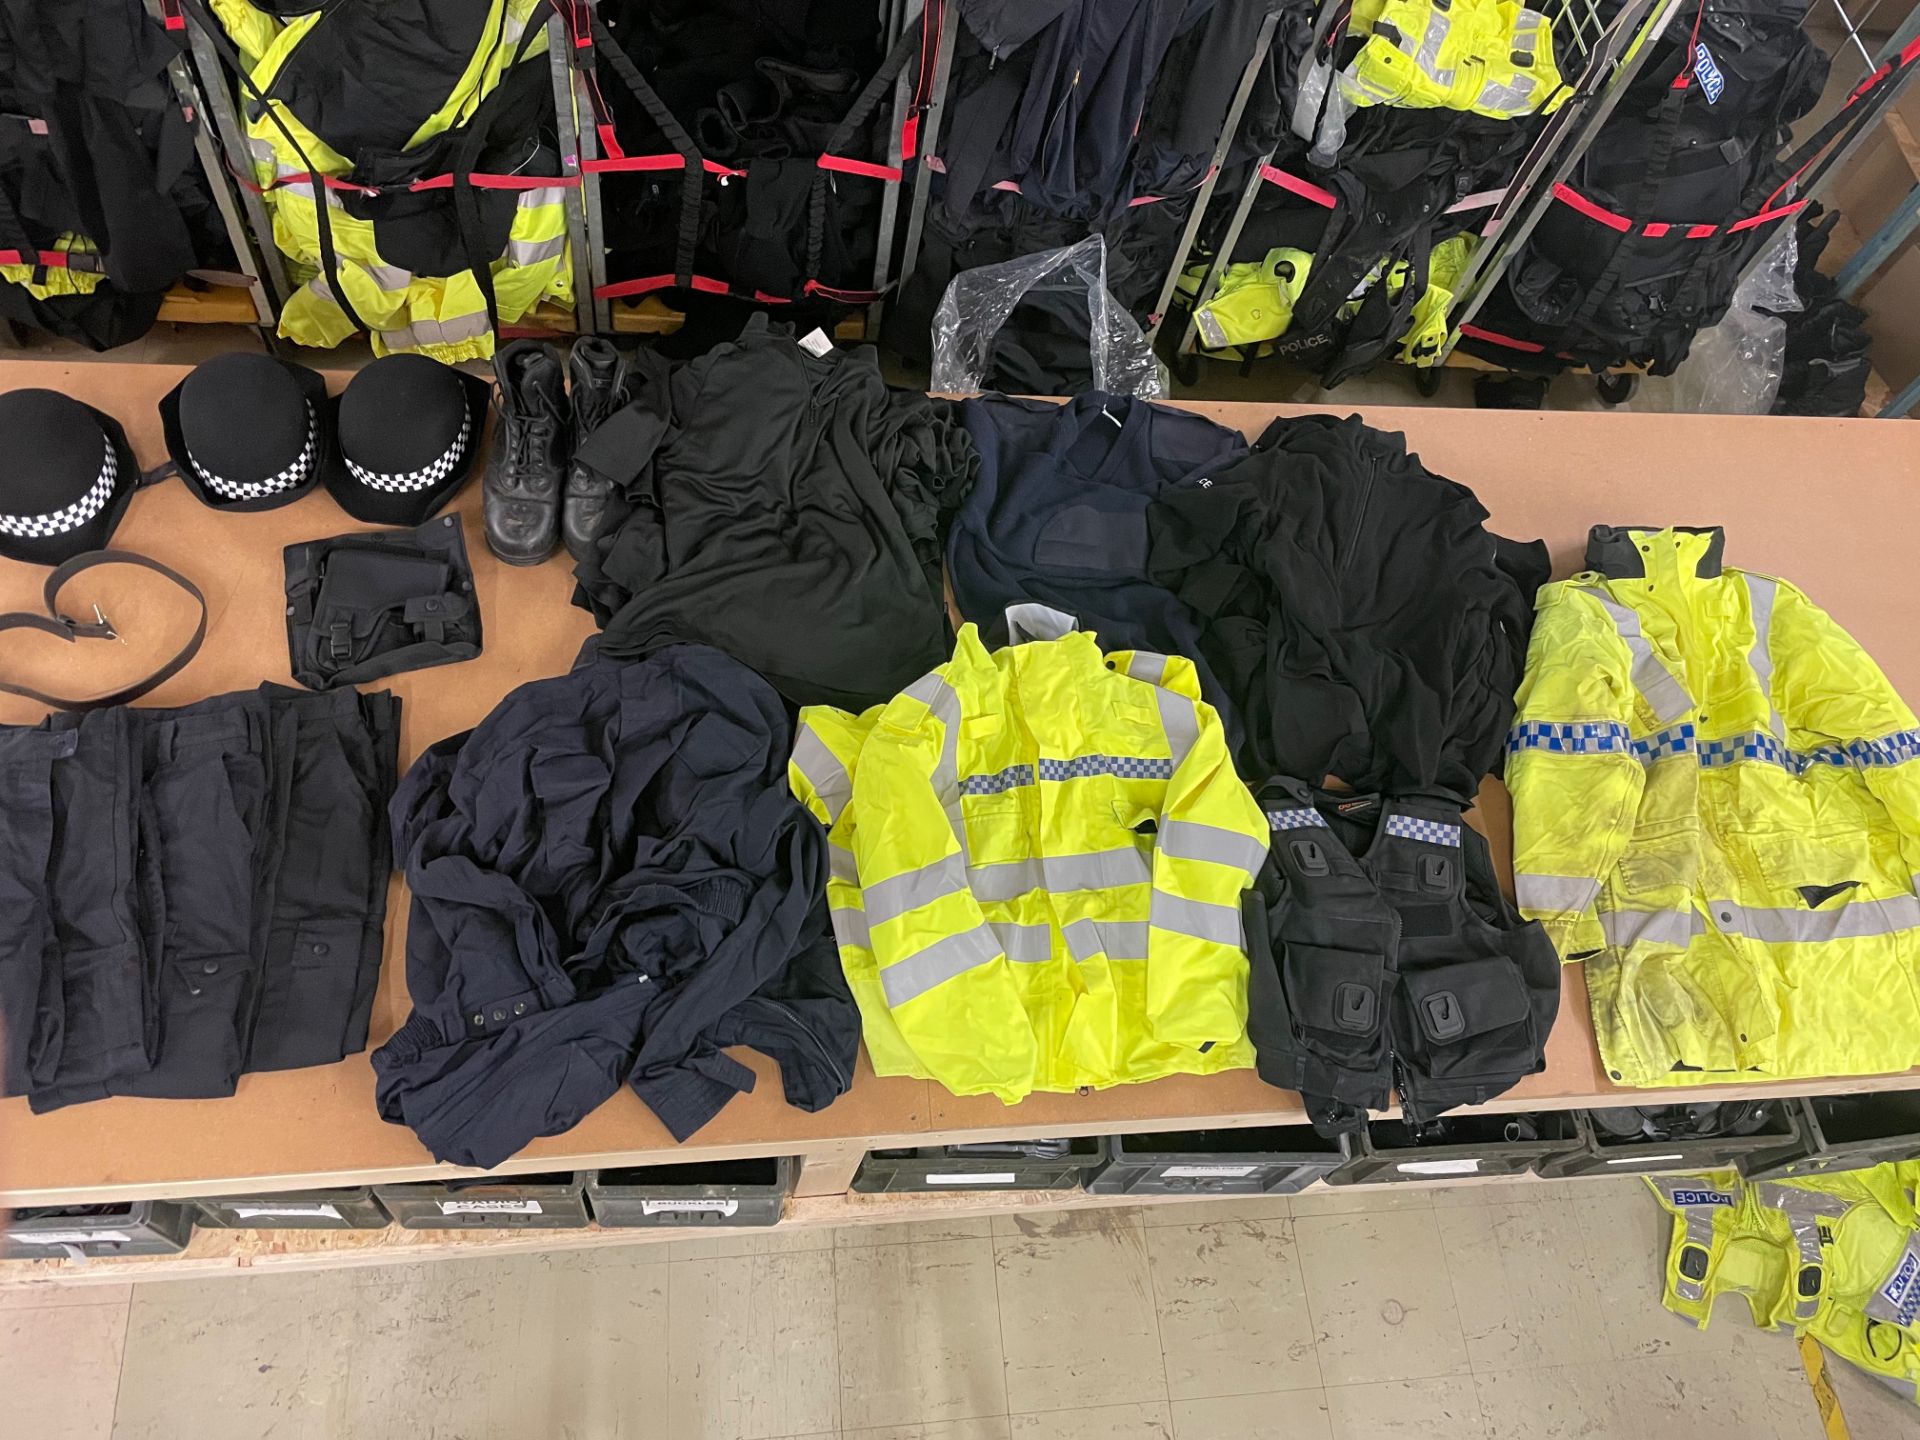 5 X BAGS EX POLICE CLOTHING & ACCESSORIES - RRP £1375.00 - Image 6 of 12